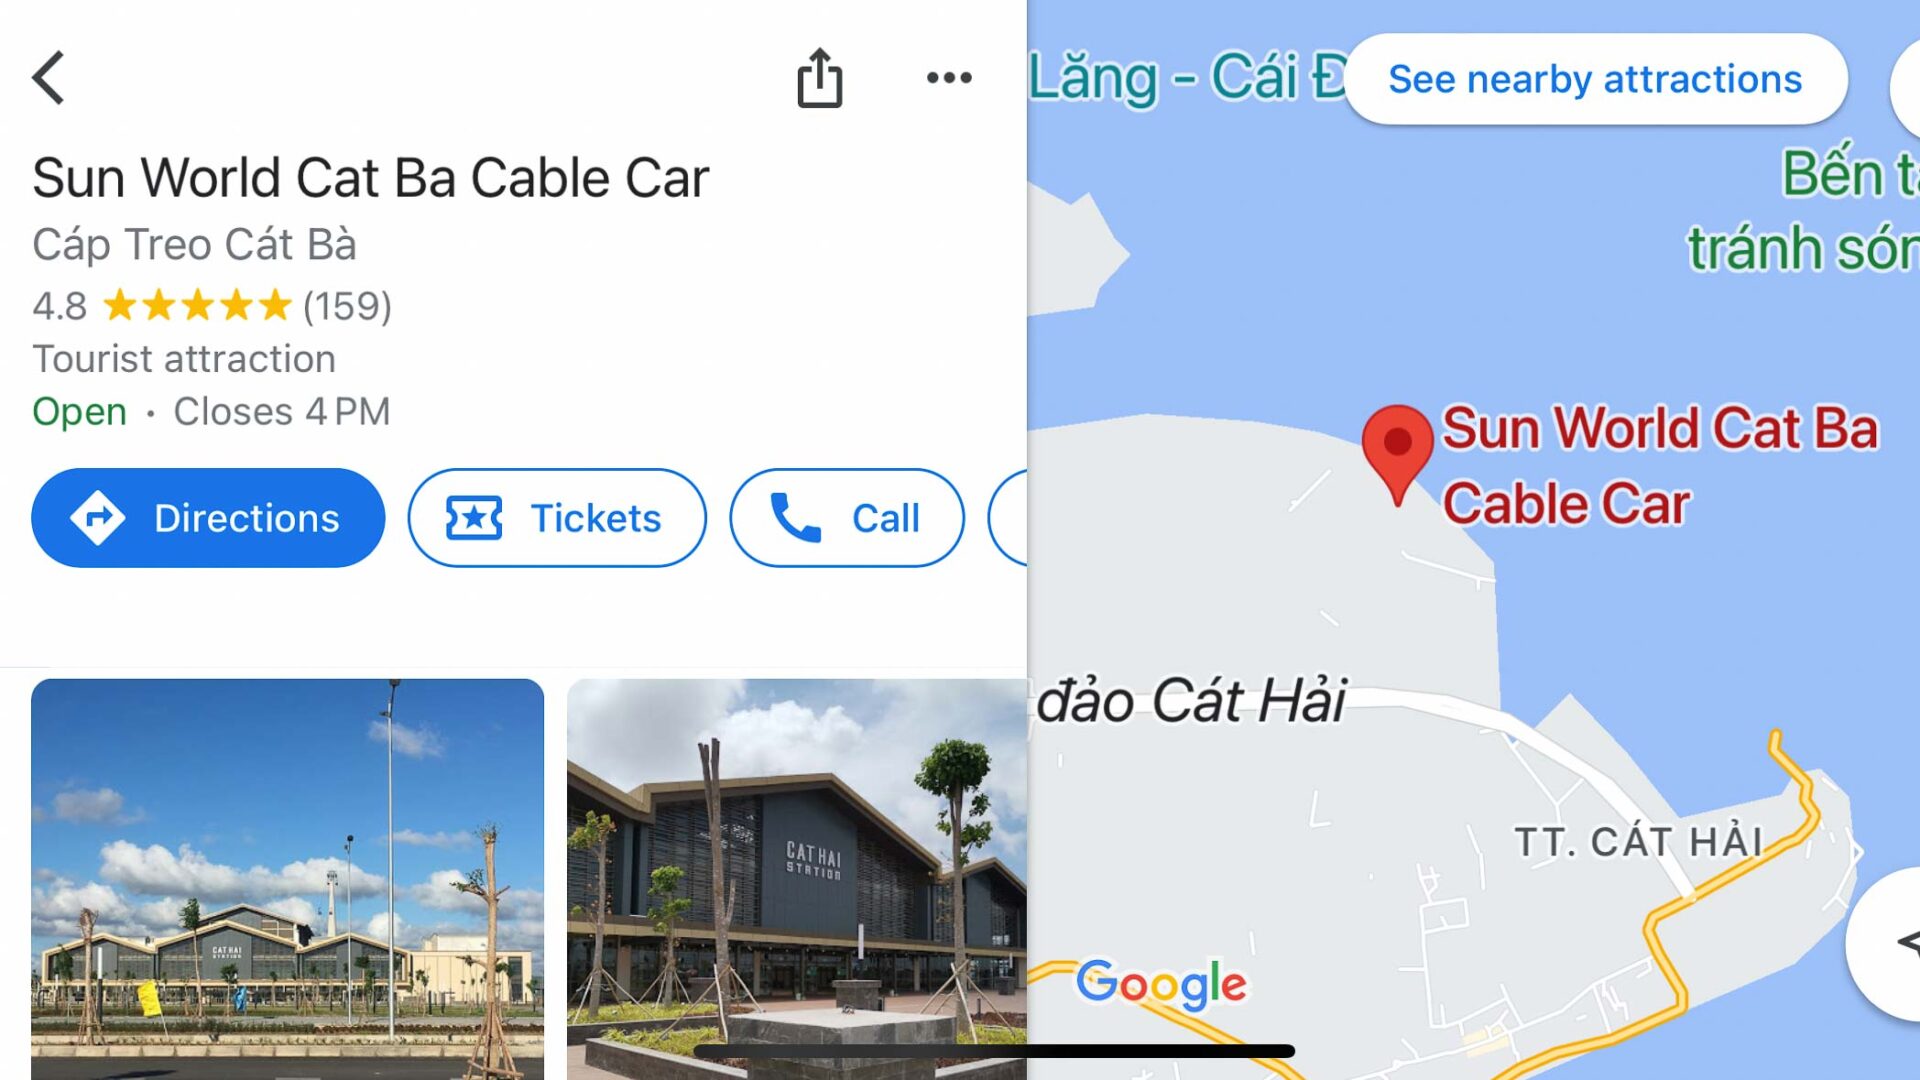 location of Cat Ba Cable car in Hai Phong on Google Maps.